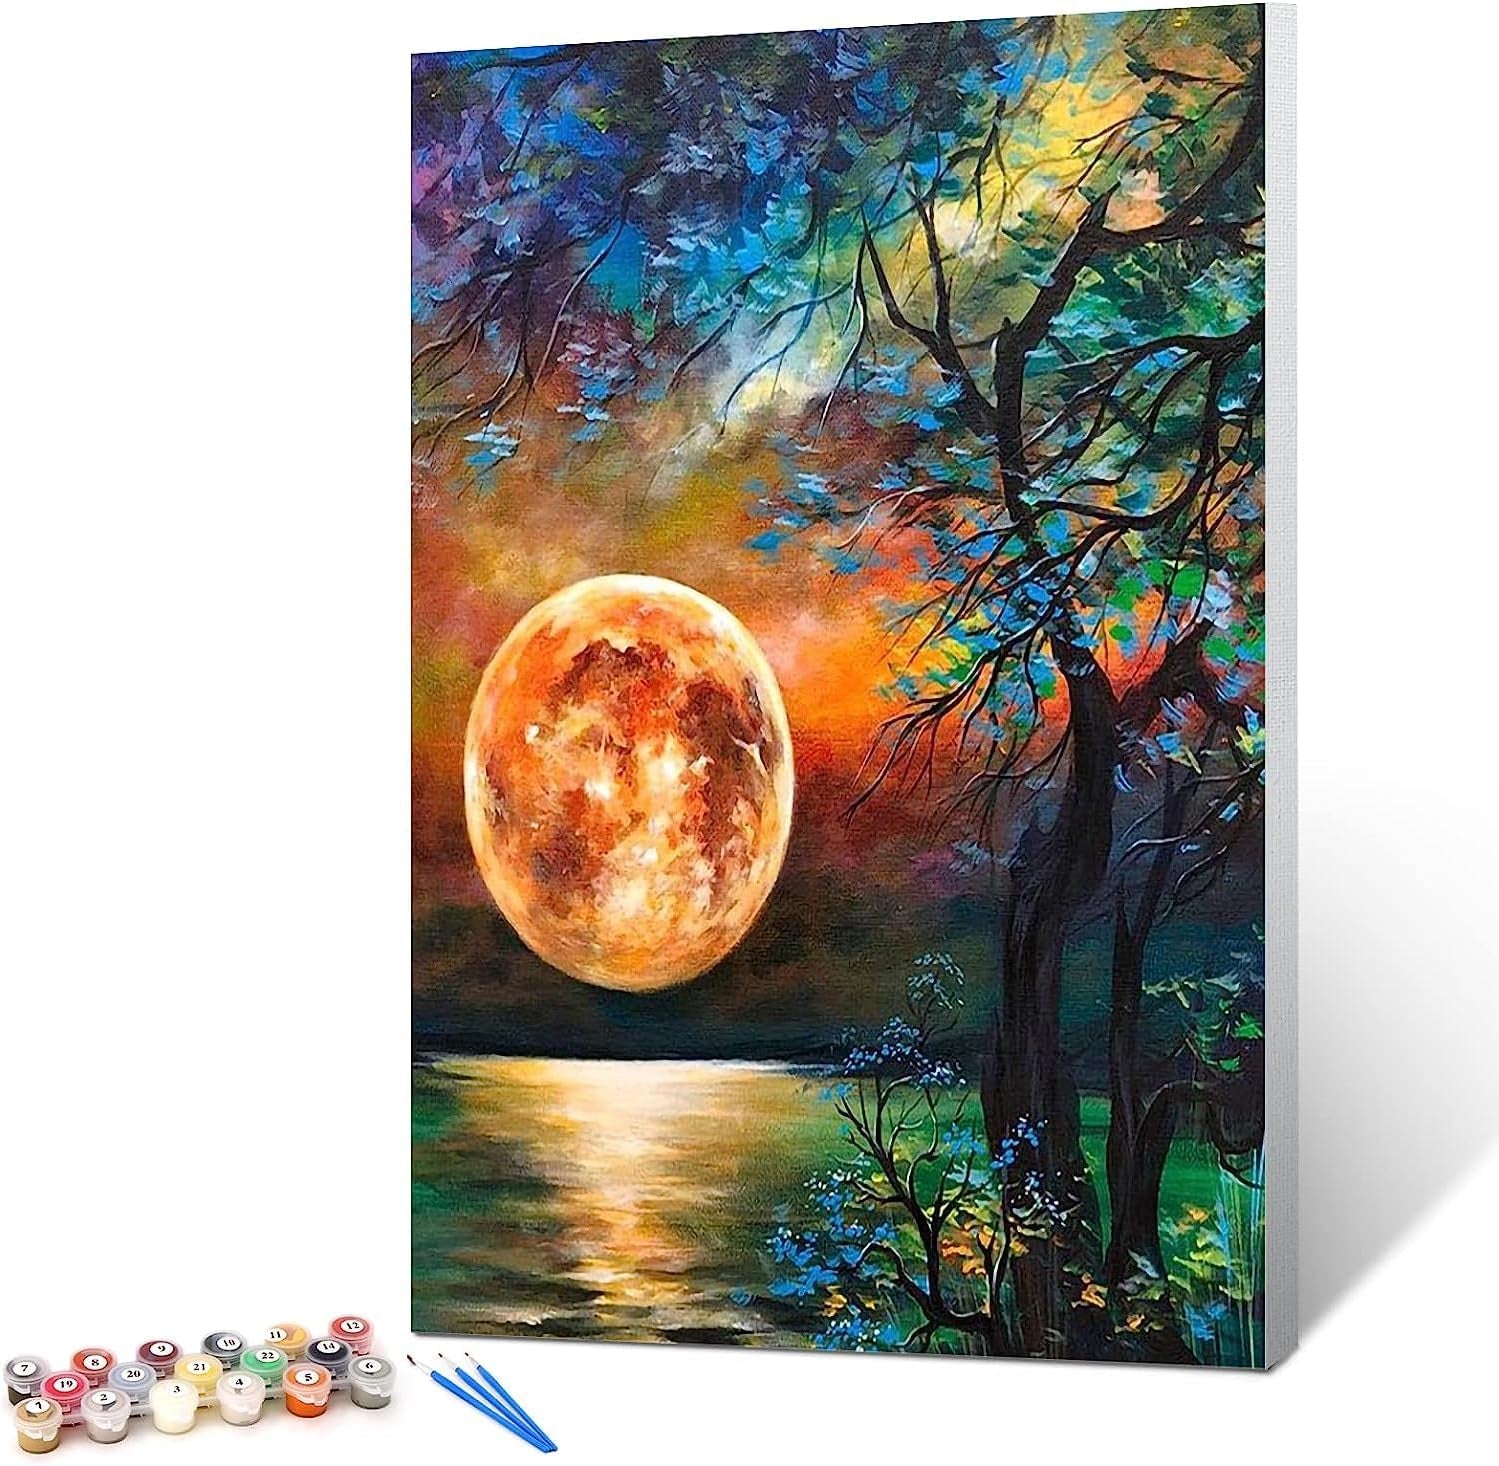 Paint by Numbers for Adults Beginner & Kids Ages 8-12 with Wooden Frame Easy Acrylic on Canvas 9X12 Inch with Paints and Brushes, Vase Flower(Include Framed)